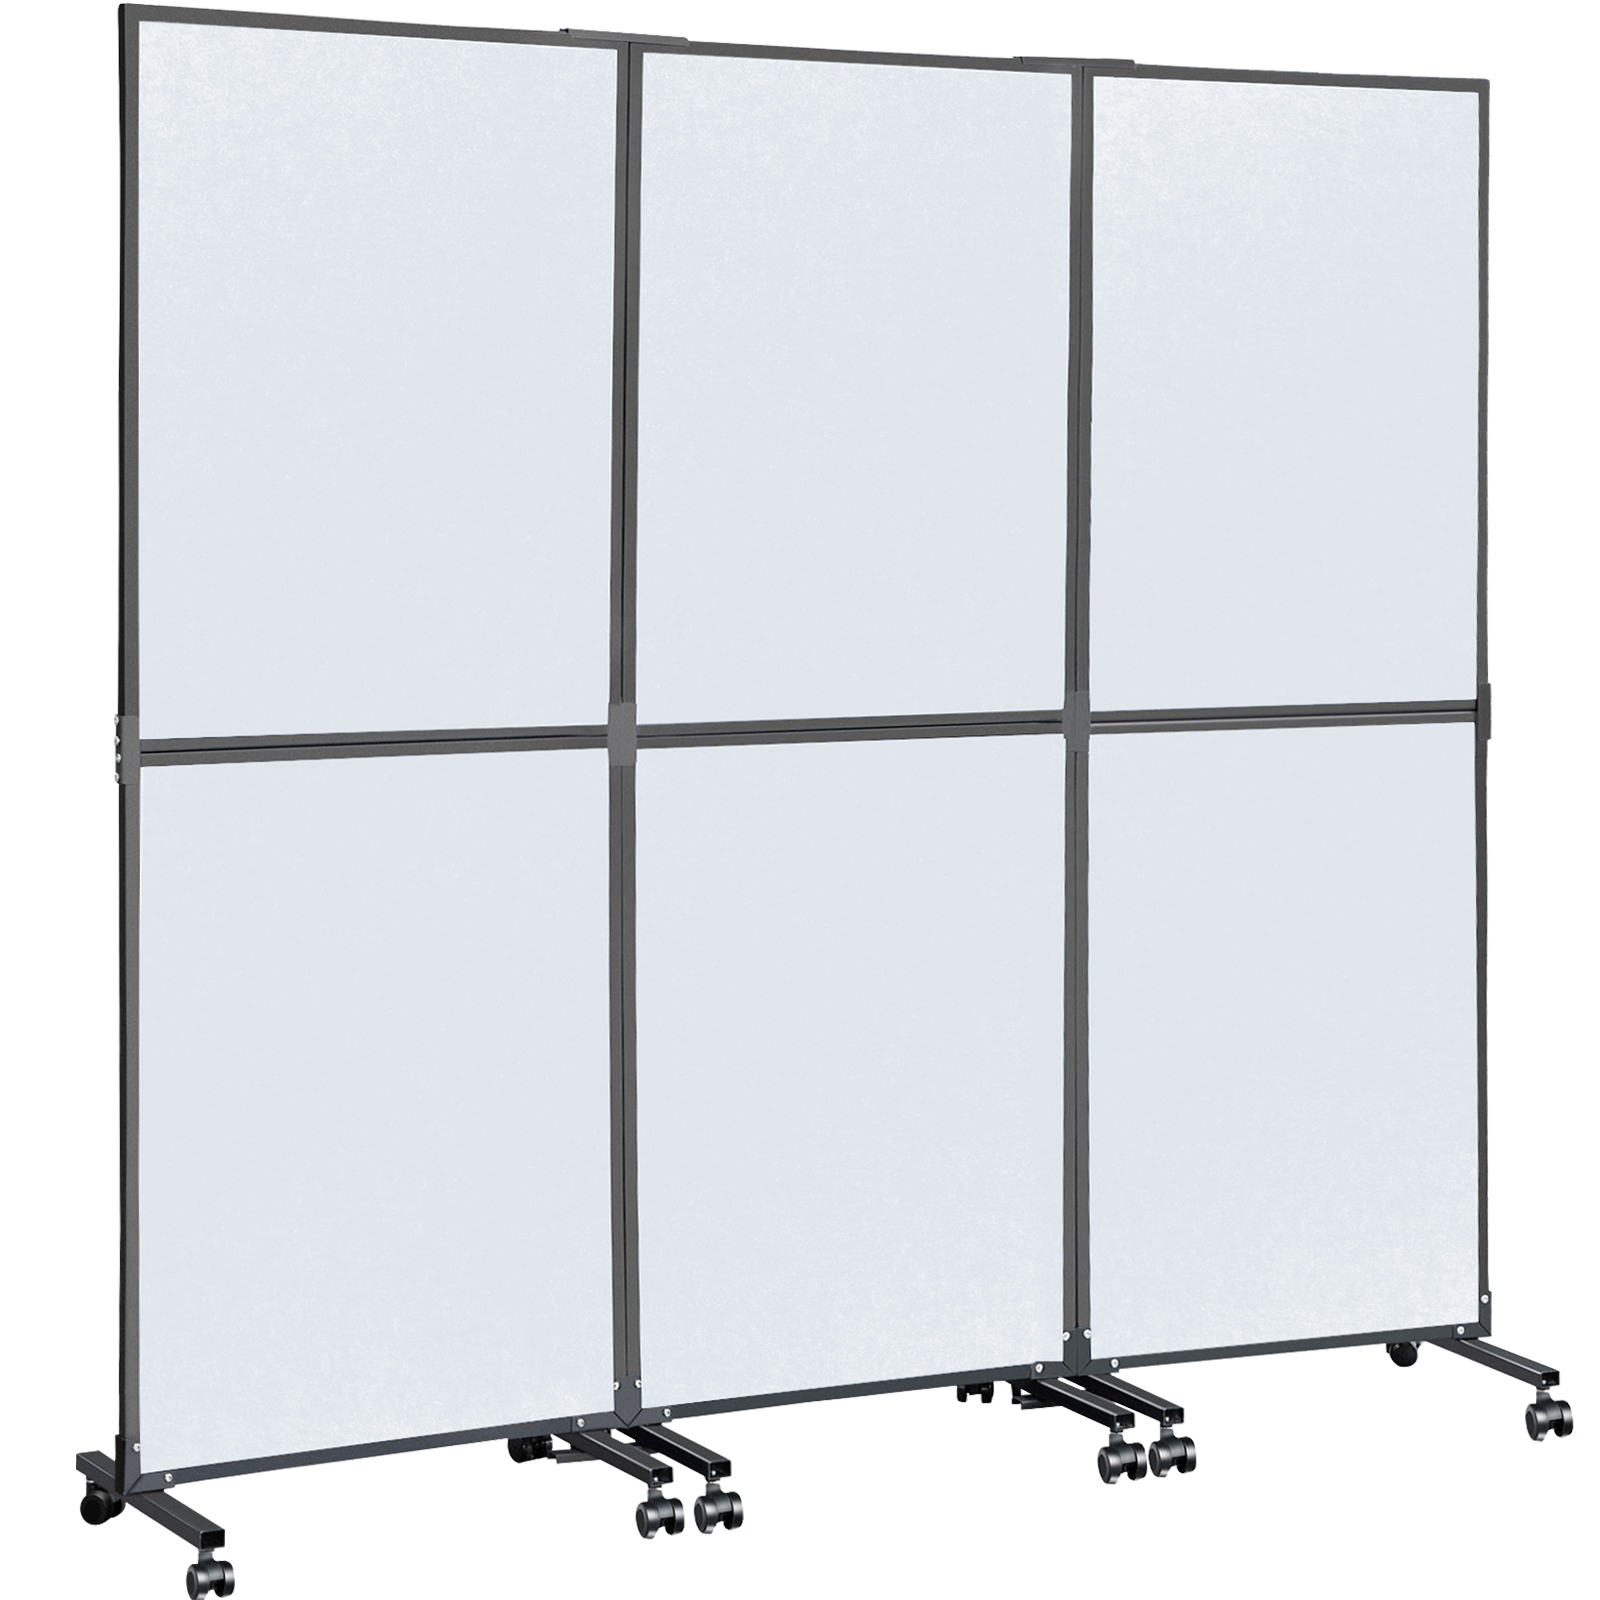 Vevor Acoustic Room Divider Office Partition Panel 72" X 66" 3 Pack In Cool Gray от Vevor Many GEOs